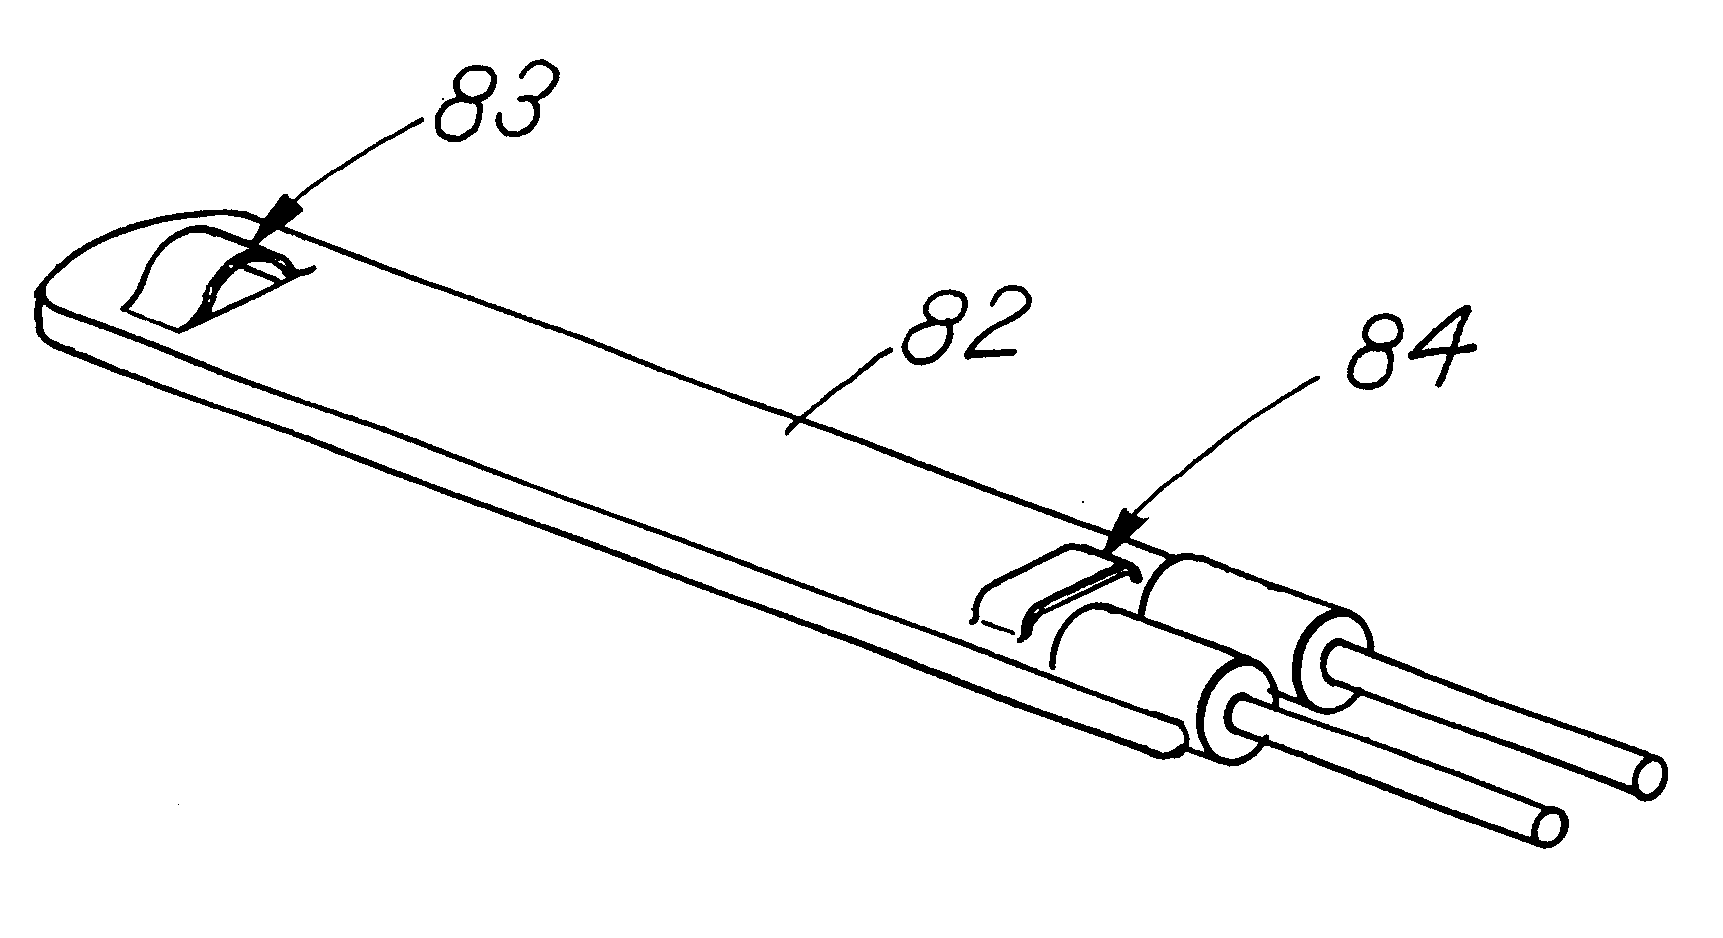 Apparatus and method for percutaneous implant of a paddle style lead